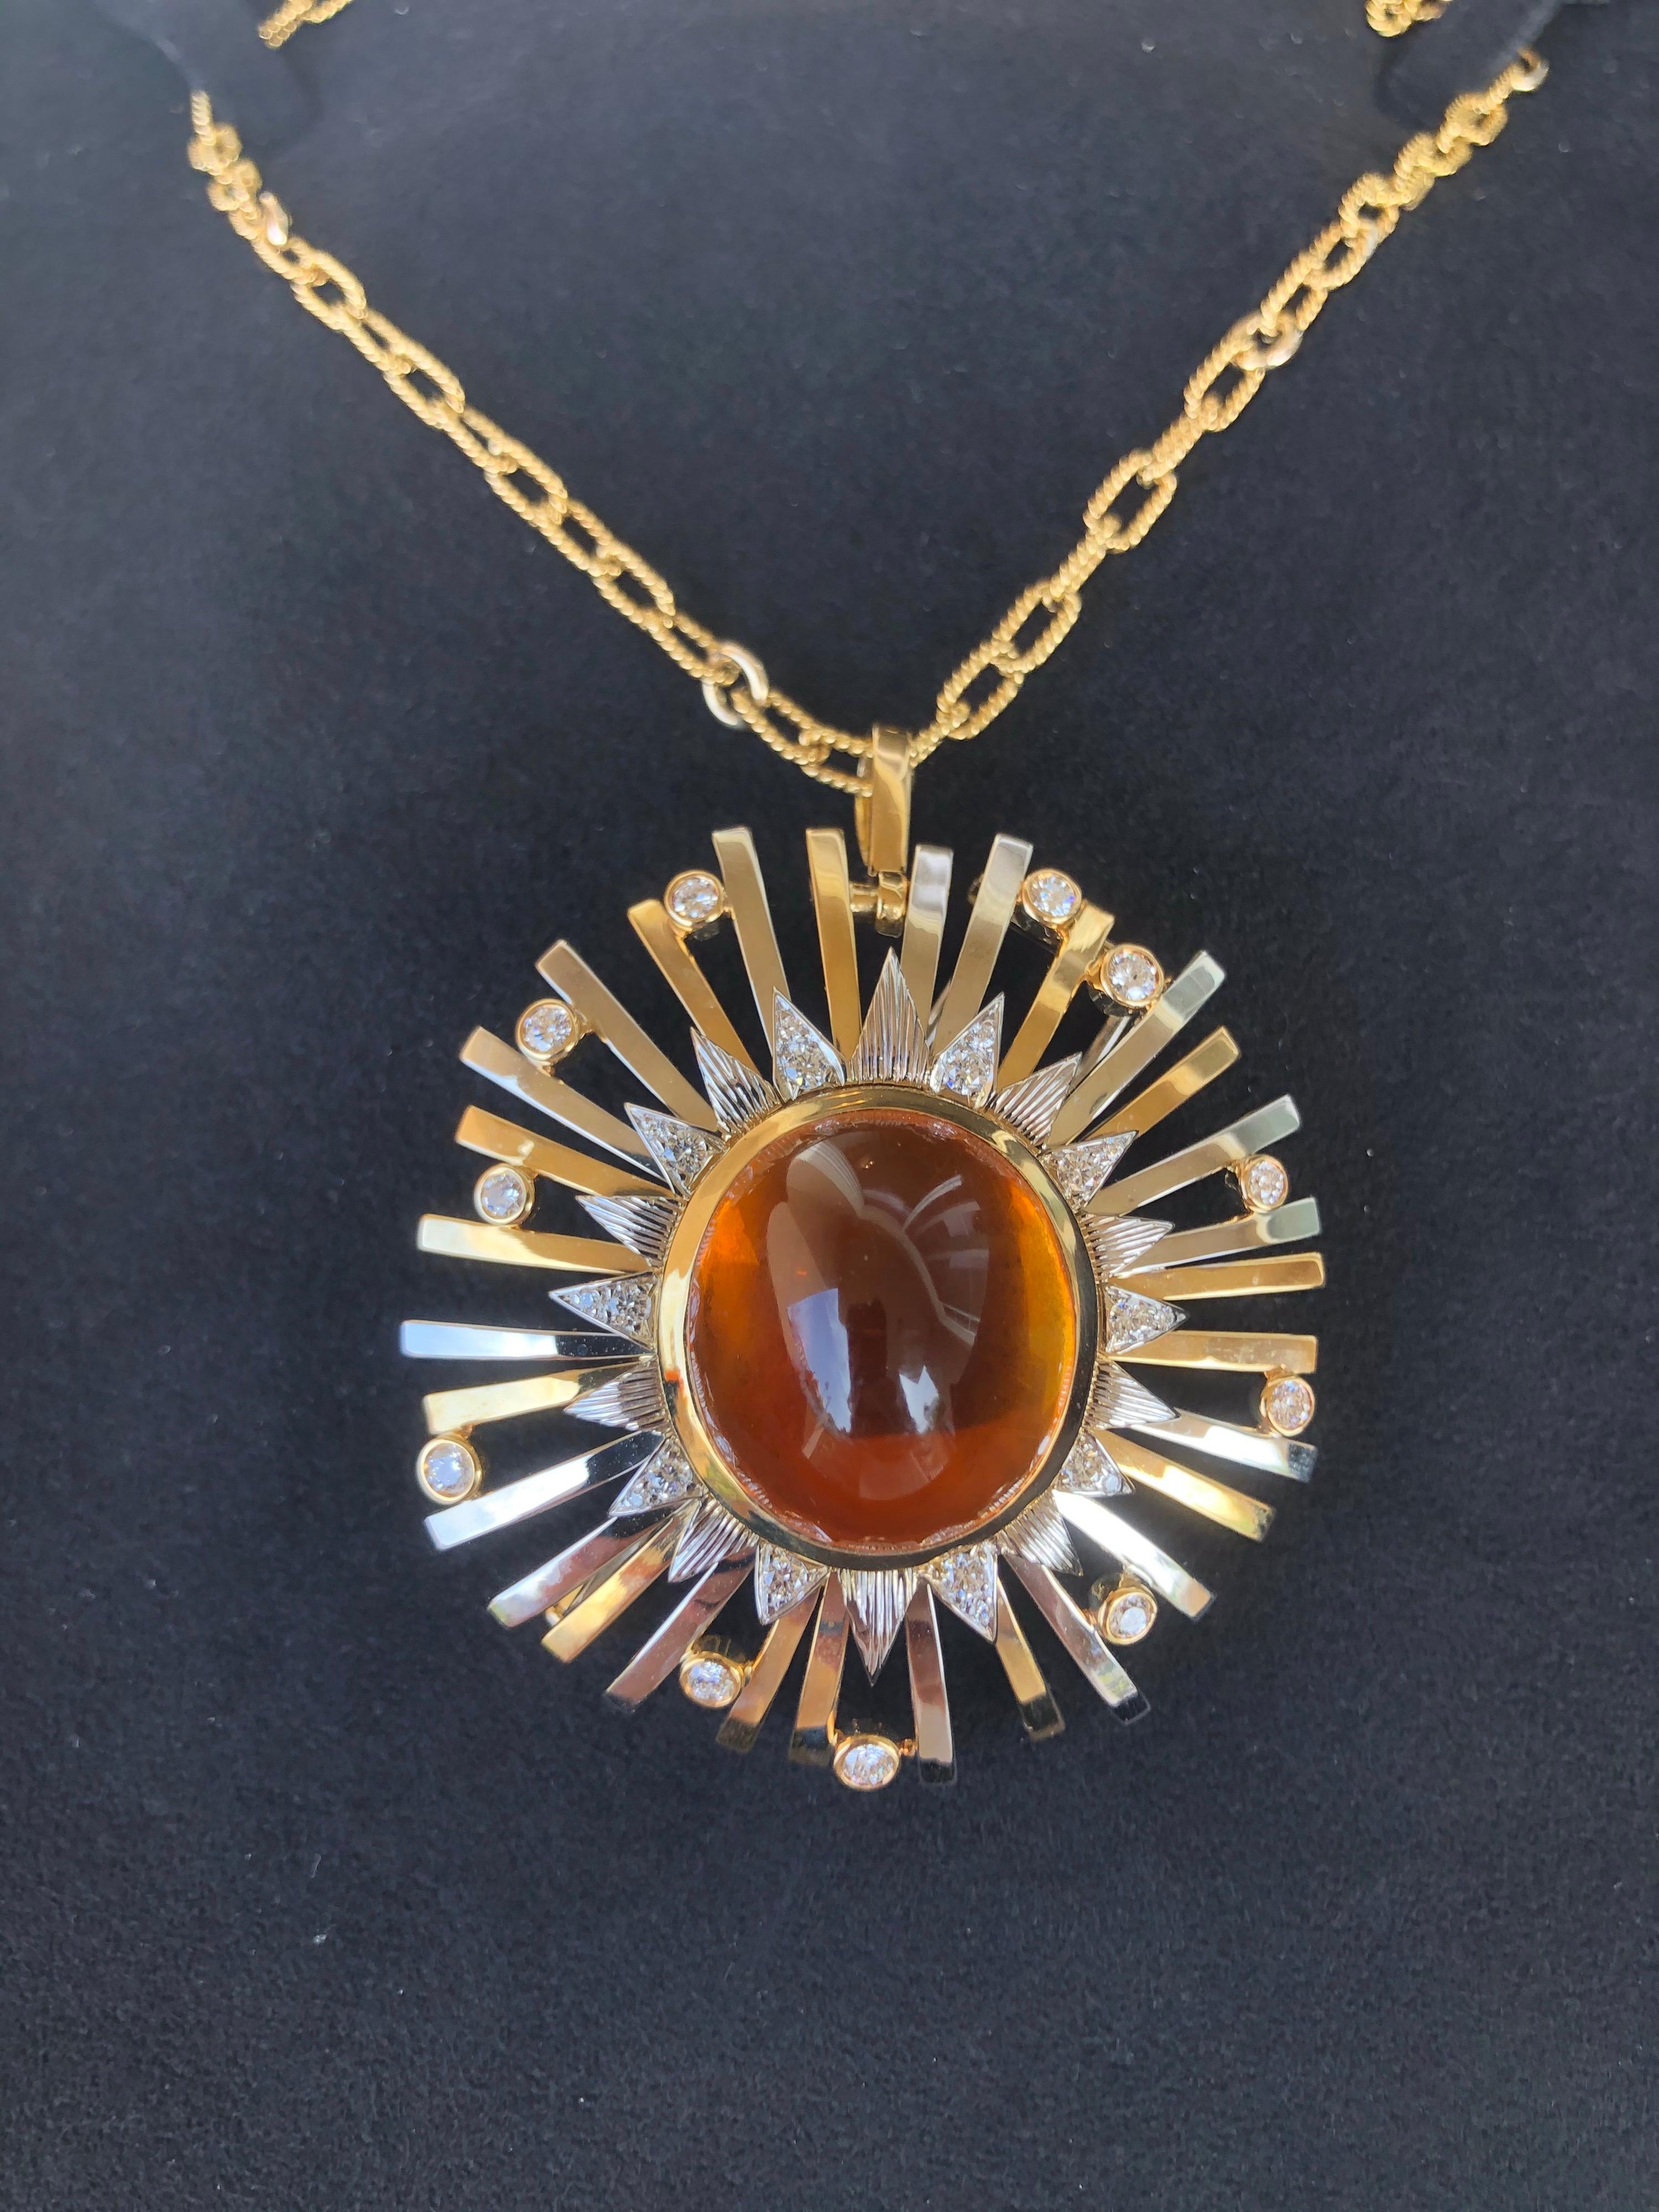 Madeira Citrine Pendant Necklace Brooch Cabochon 24.14 Carat  For Sale 11